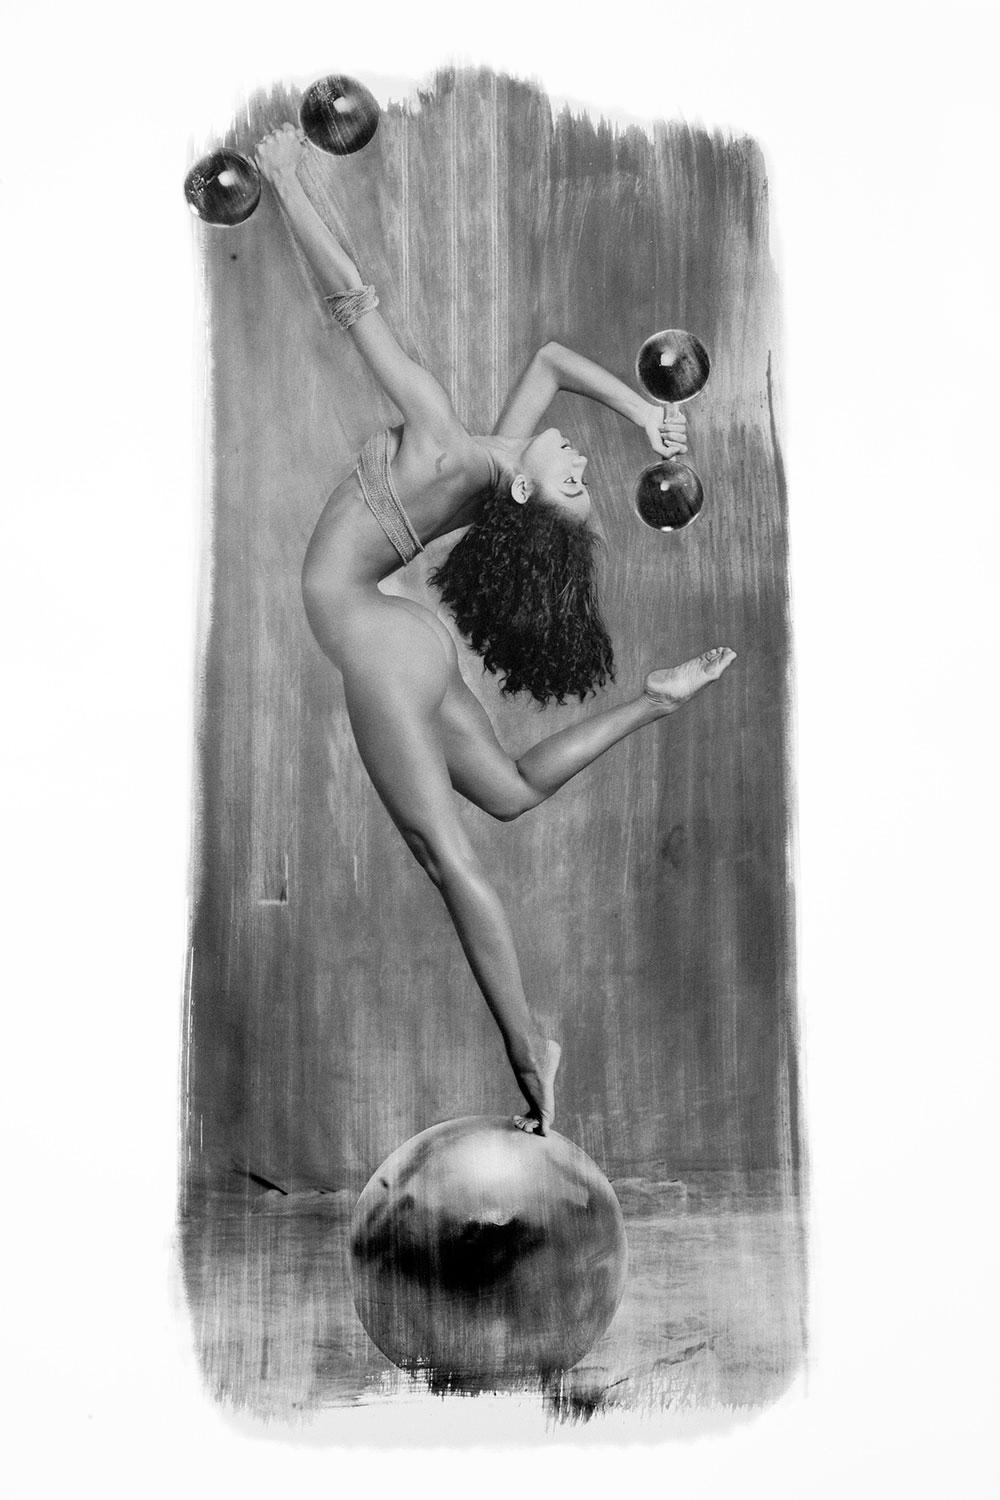 Uwe Ommer Nude Photograph - Les Acrobates II. Limited Edition Photograph